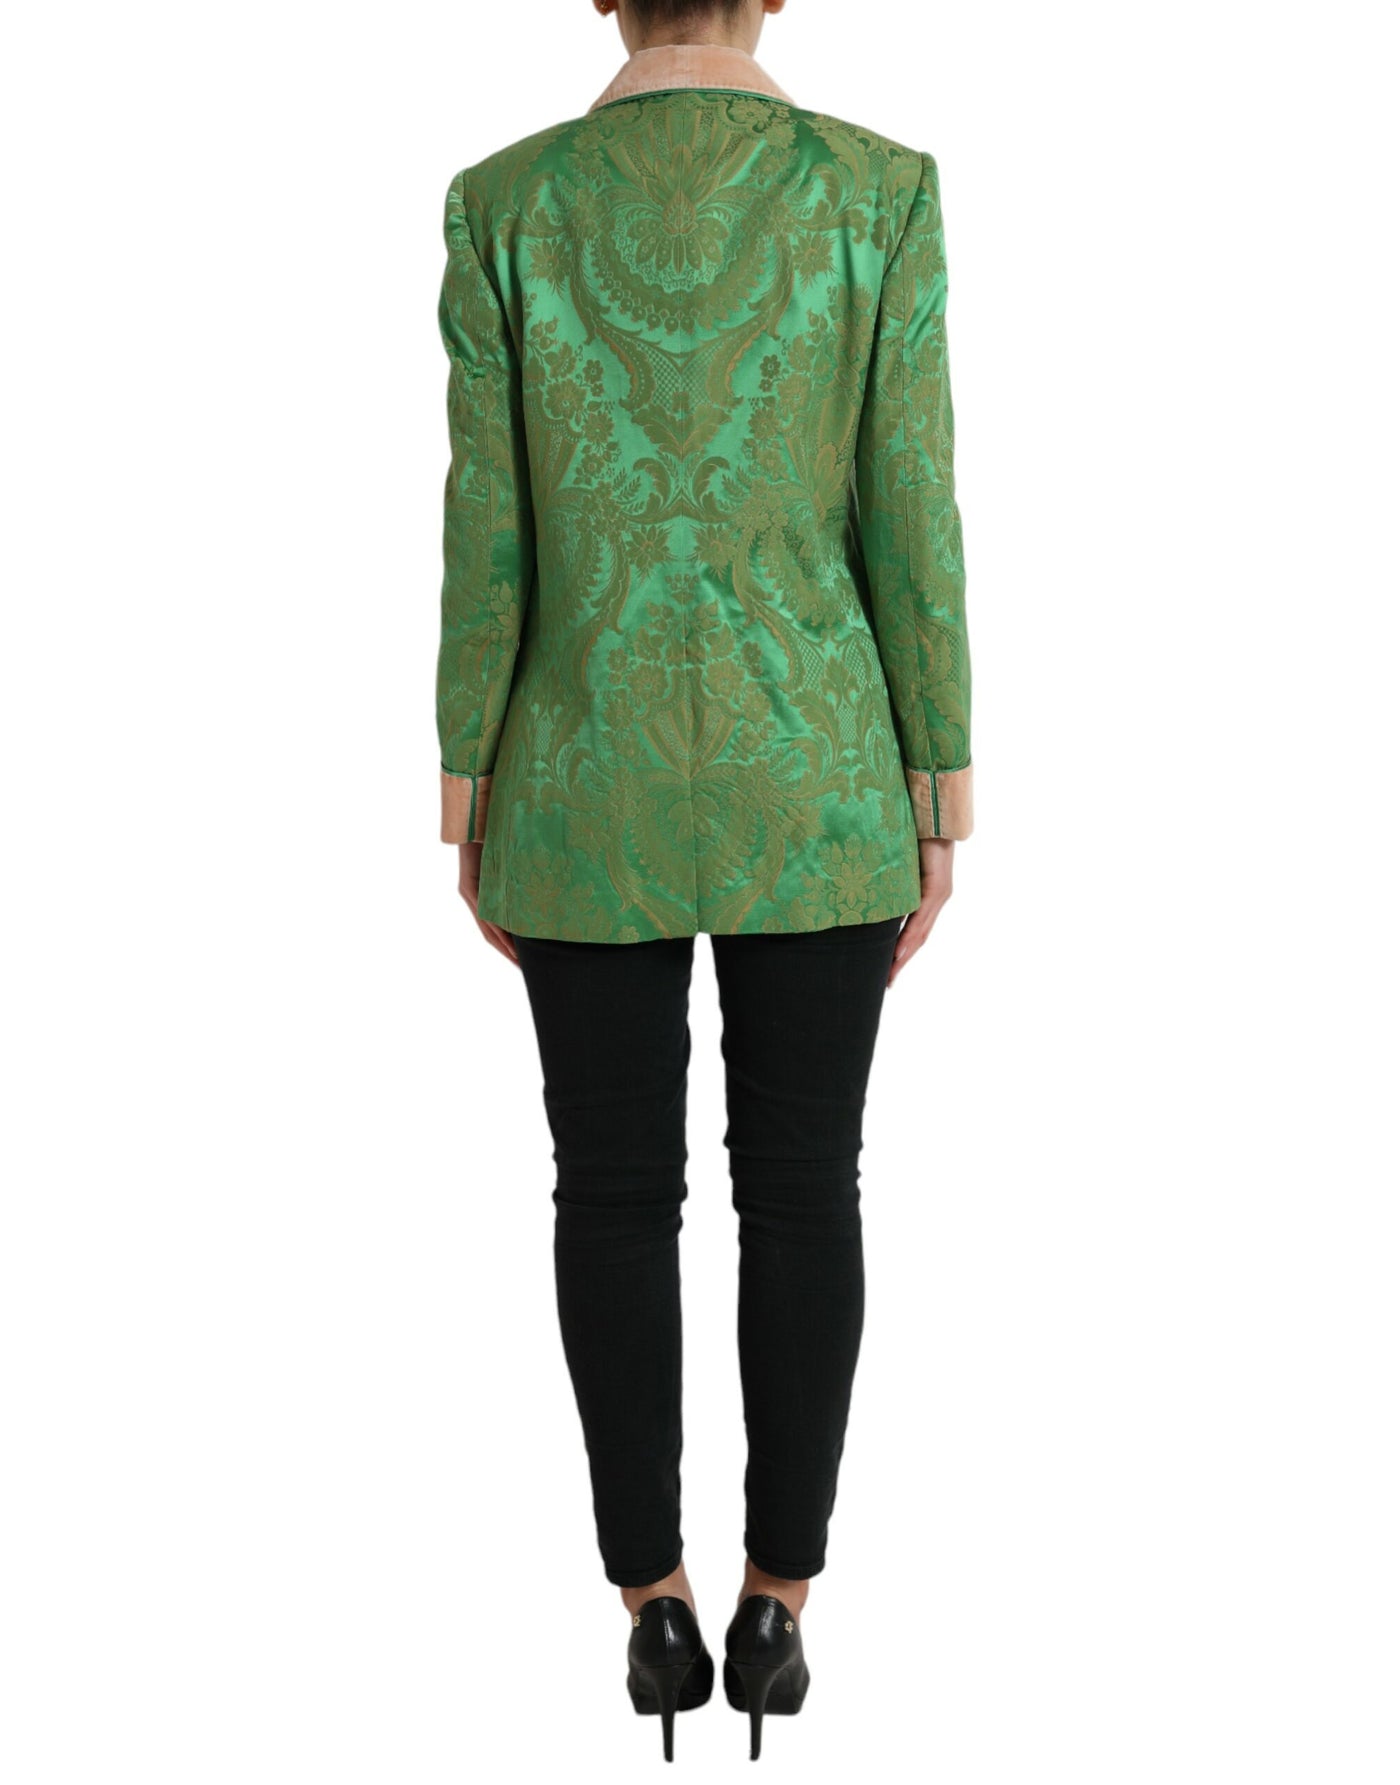 Dolce & Gabbana Green Floral Double Breasted Coat Jacket